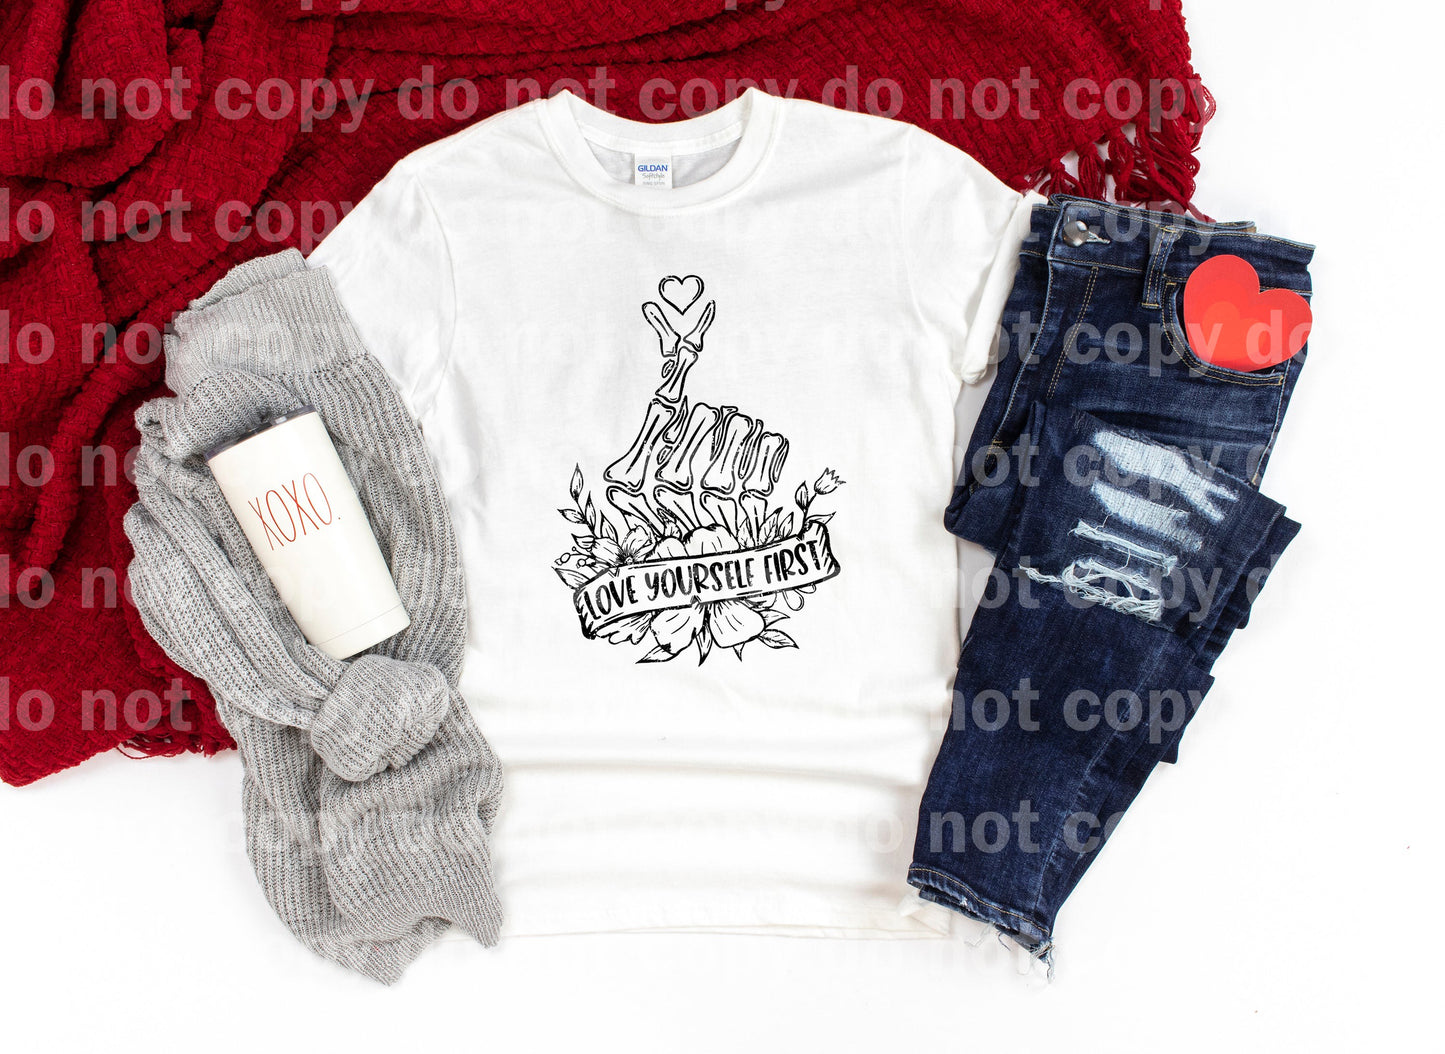 Love Yourself First Heart Finger Skellie Distressed Full Color/One Color with Pocket Option Dream Print or Sublimation Print